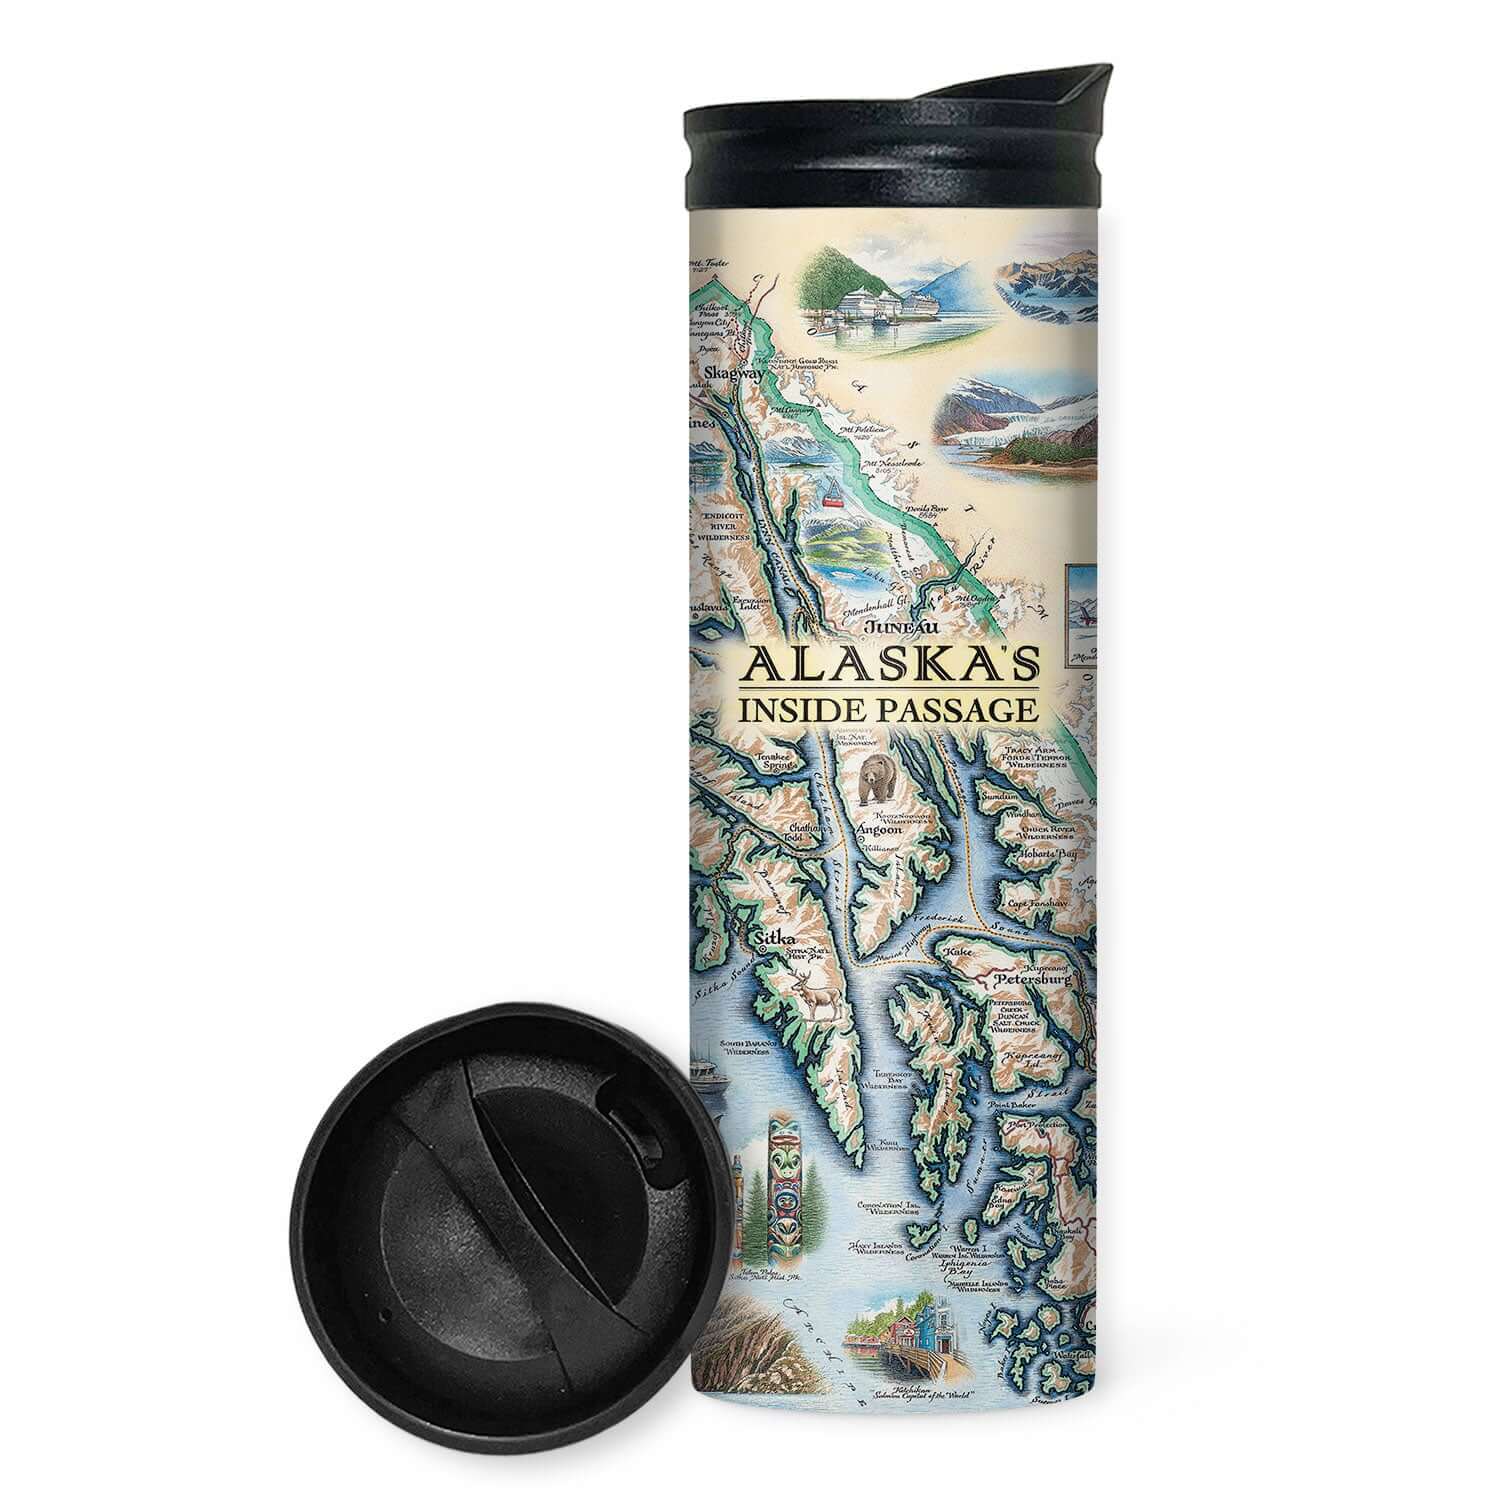 Alaska’s Inside Passage 16 oz travel bottle in blue and green colors. Features bears, whales, the Pacific Ocean, mountains, boats, wildlife-filled fjords, and tidewater glaciers, mountain goats & sheep. Including the towns of Sitka, Juneau, Ketchikan, and others.